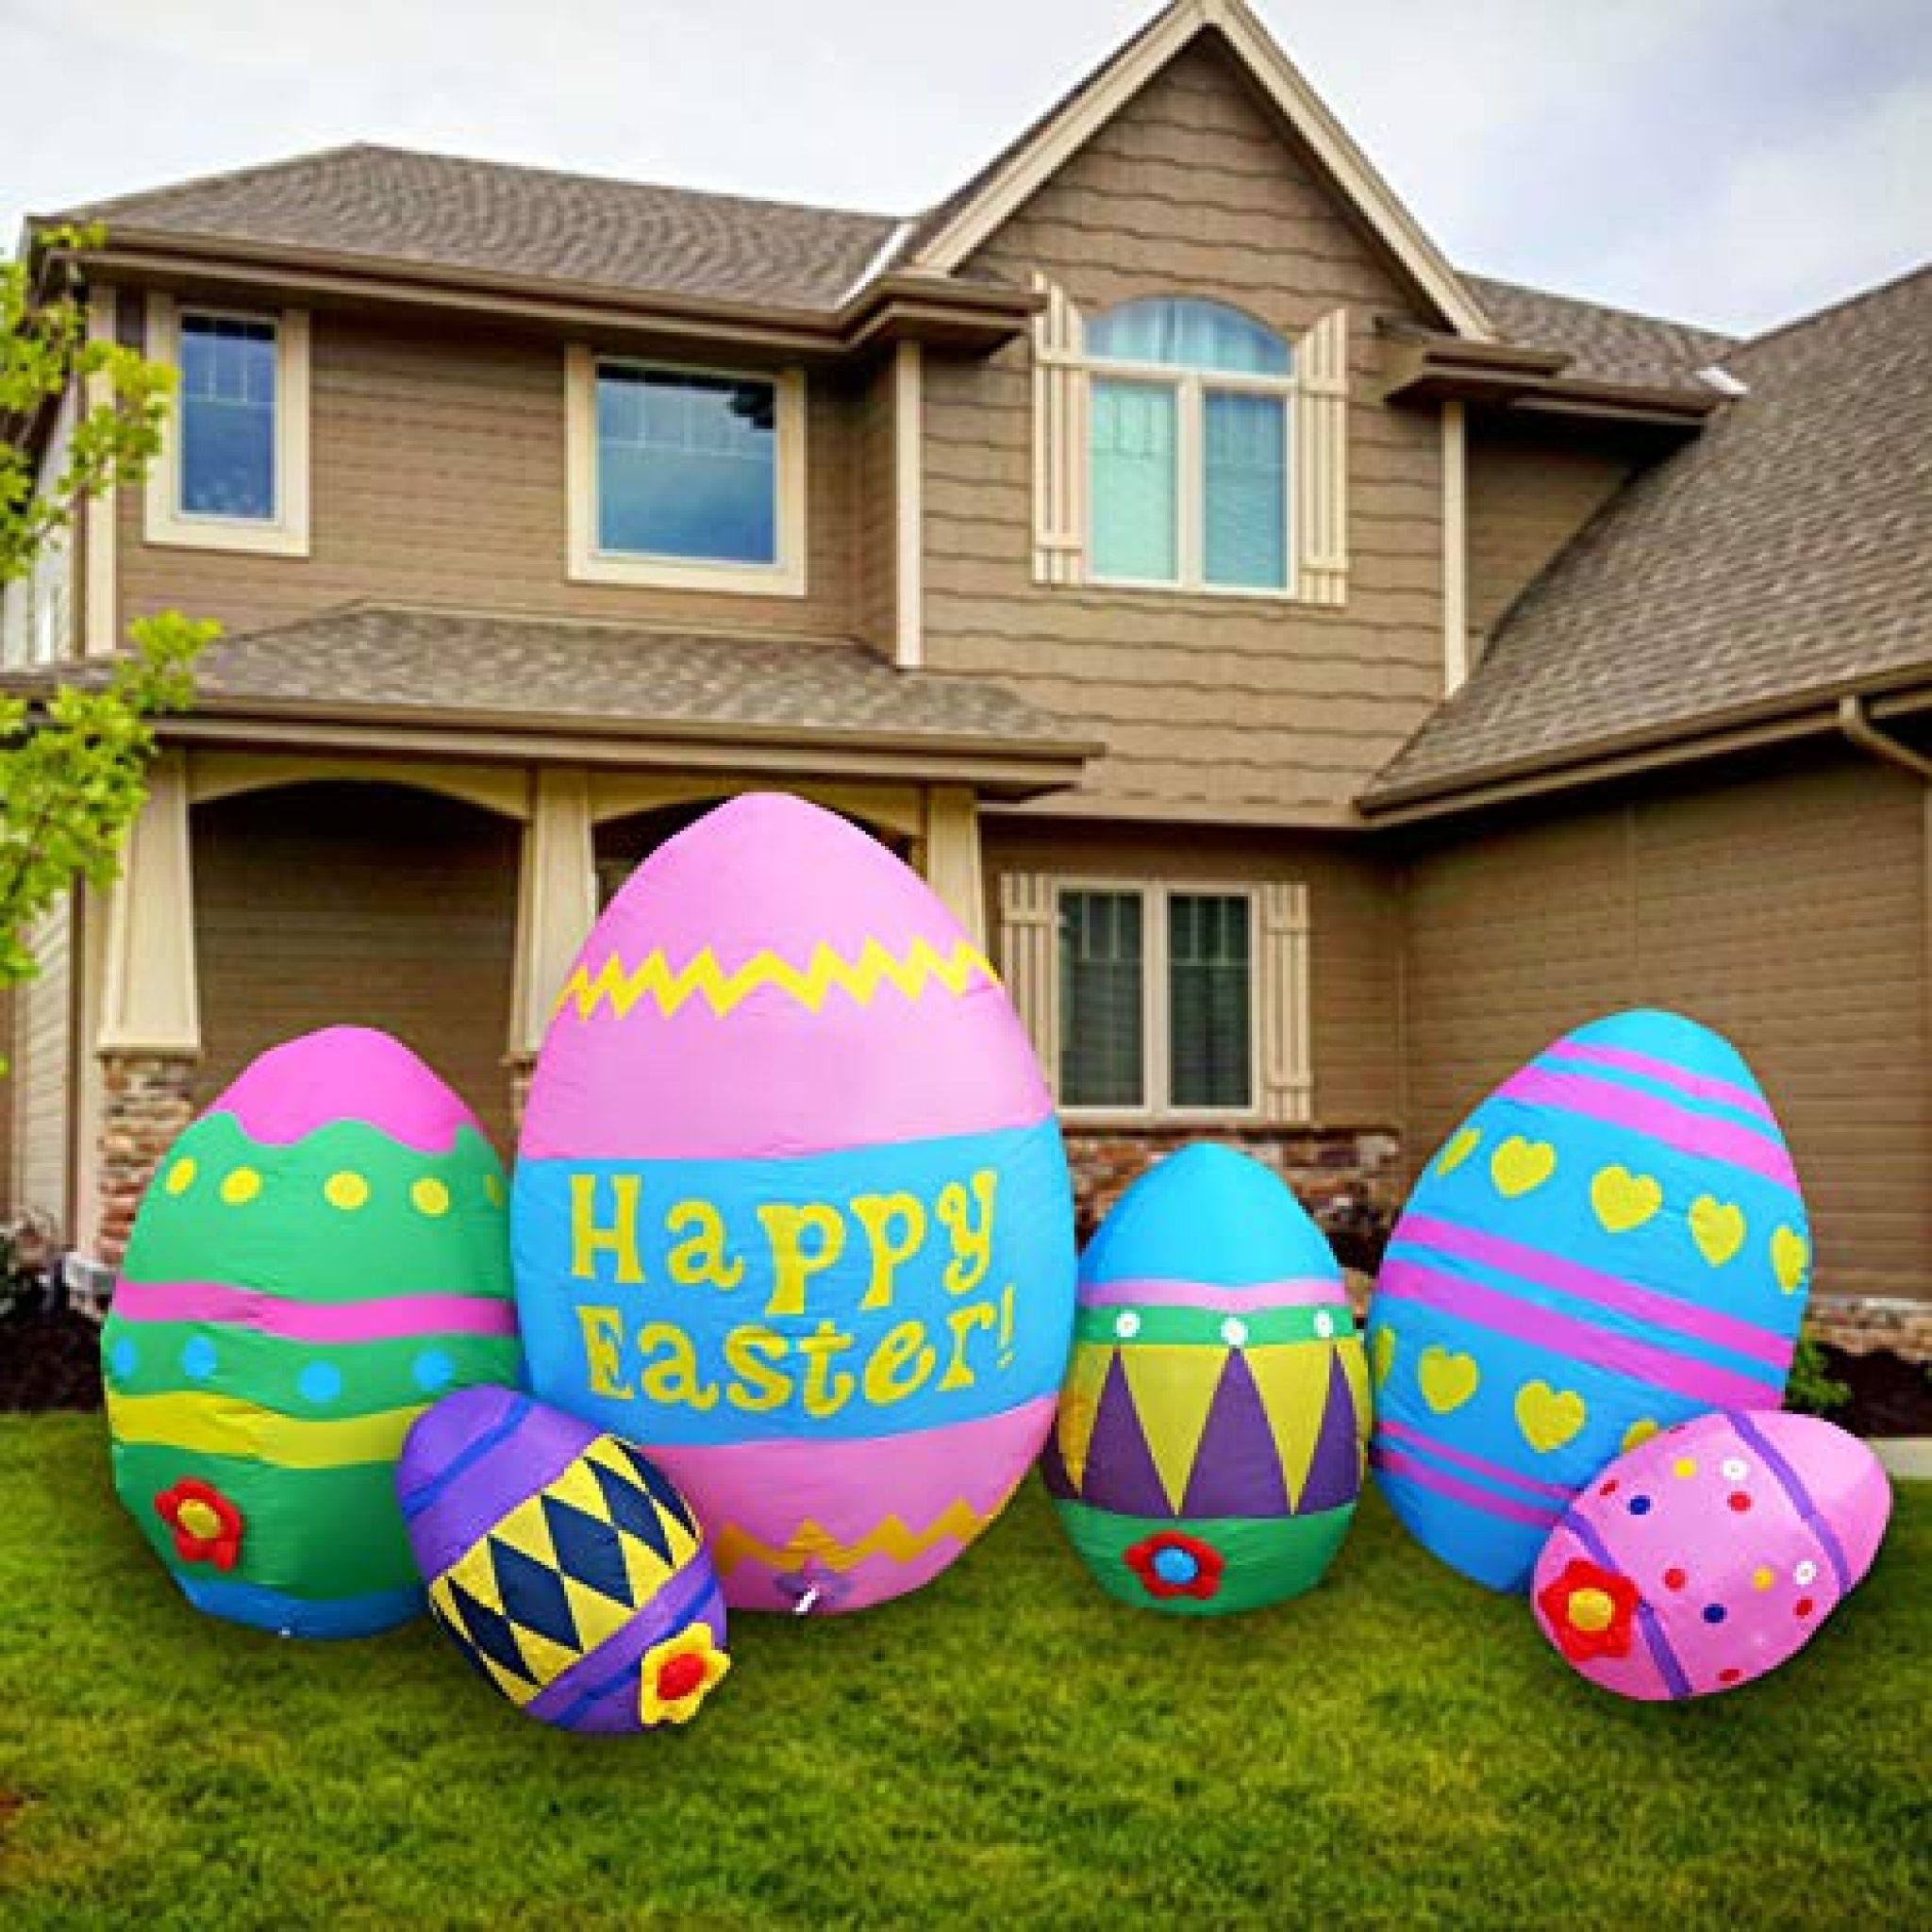 SEASONBLOW 8 Ft Easter Egg Inflatable Eggs Decoration for Indoor ...